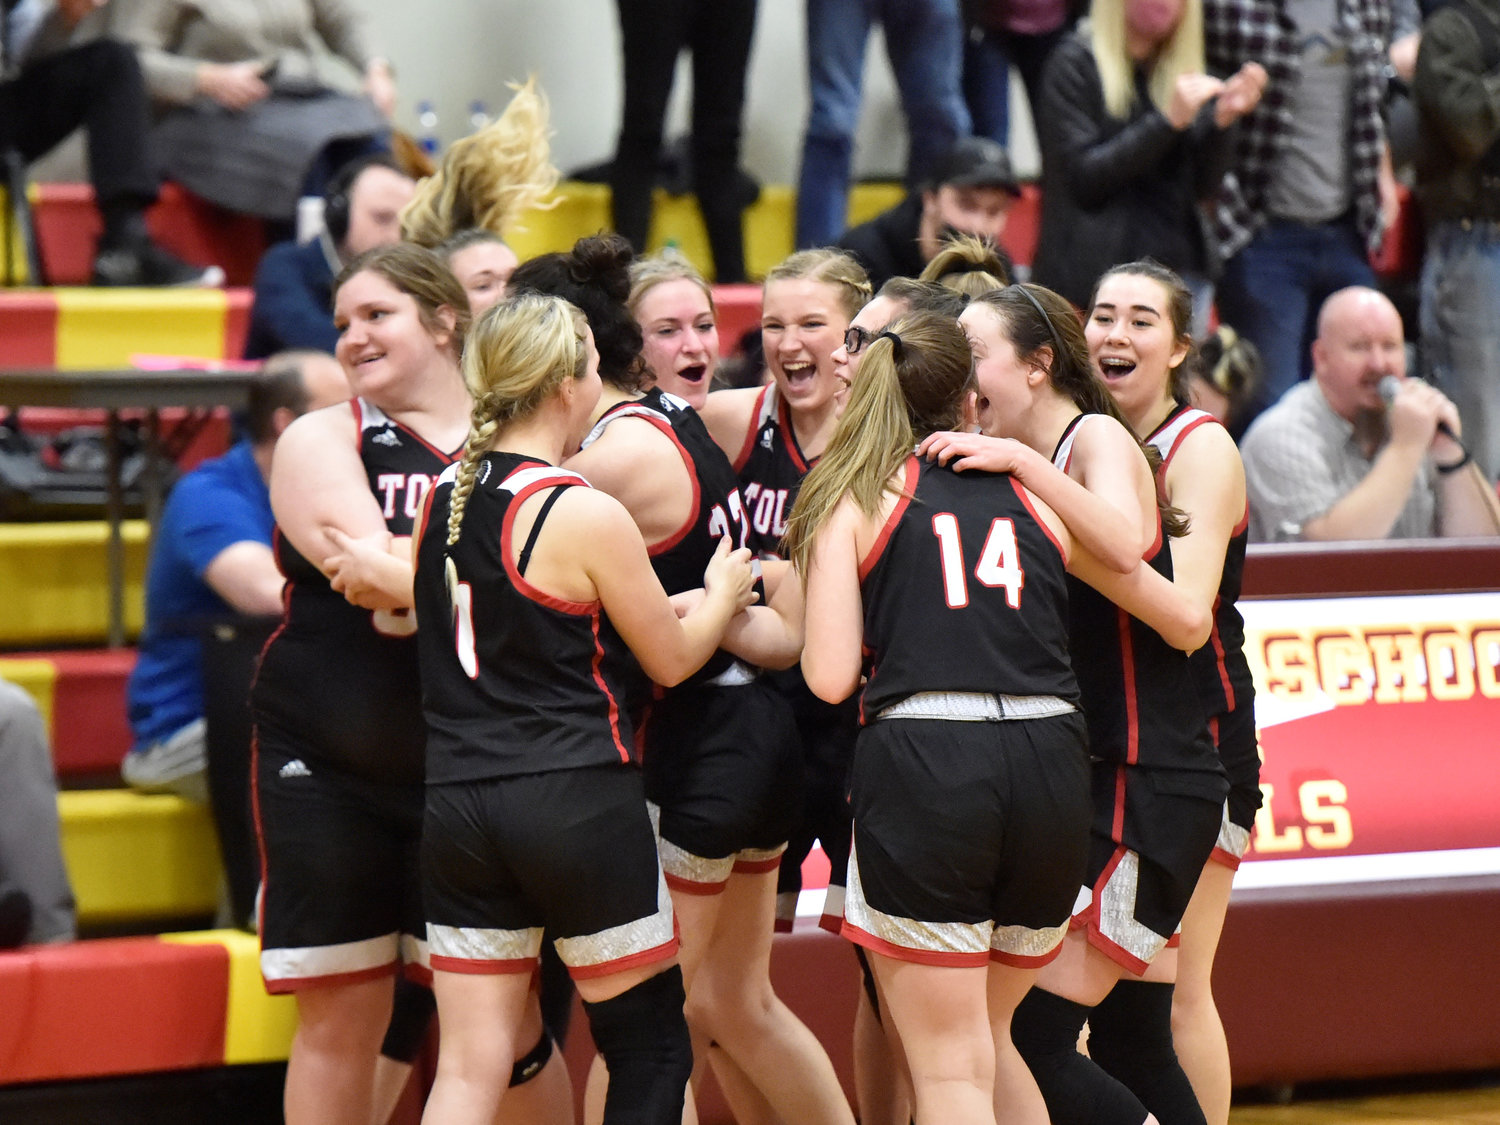 The Toledo girls basketball team celebrates after taking down the Winlock Cardinals on a 3-pointer from Rose Dillon in the final seconds on Wednesday, Jan. 5, in Winlock.